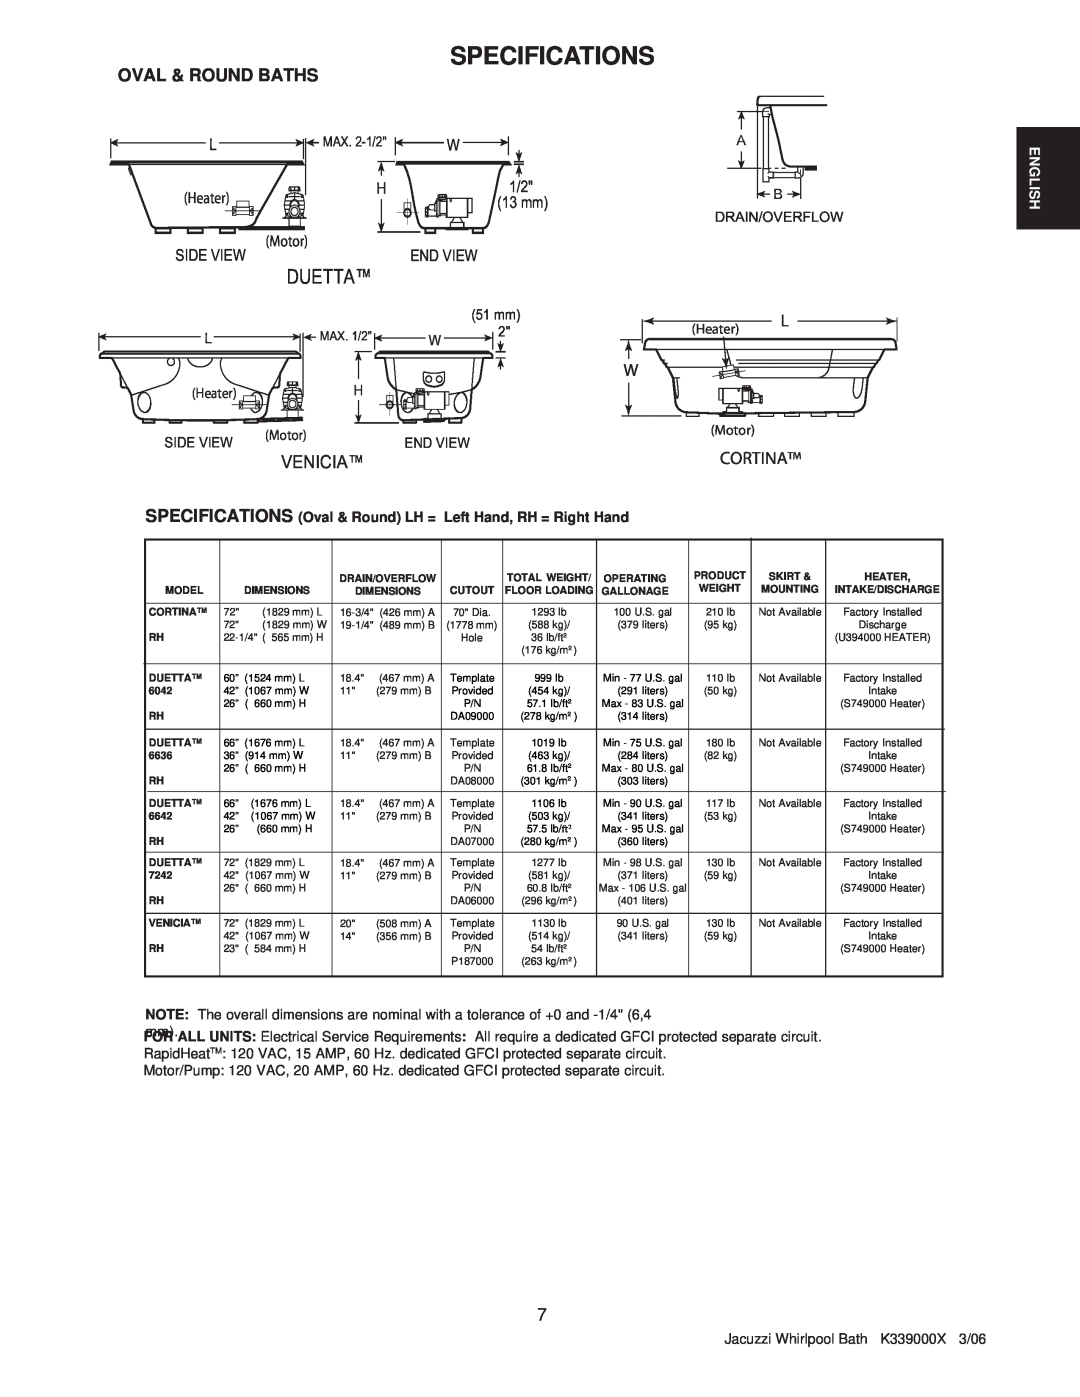 Jacuzzi K339000X manual Specifications, Cortina, Heater, Motor, SPECIFICATIONS Oval & Round LH = Left Hand, RH = Right Hand 